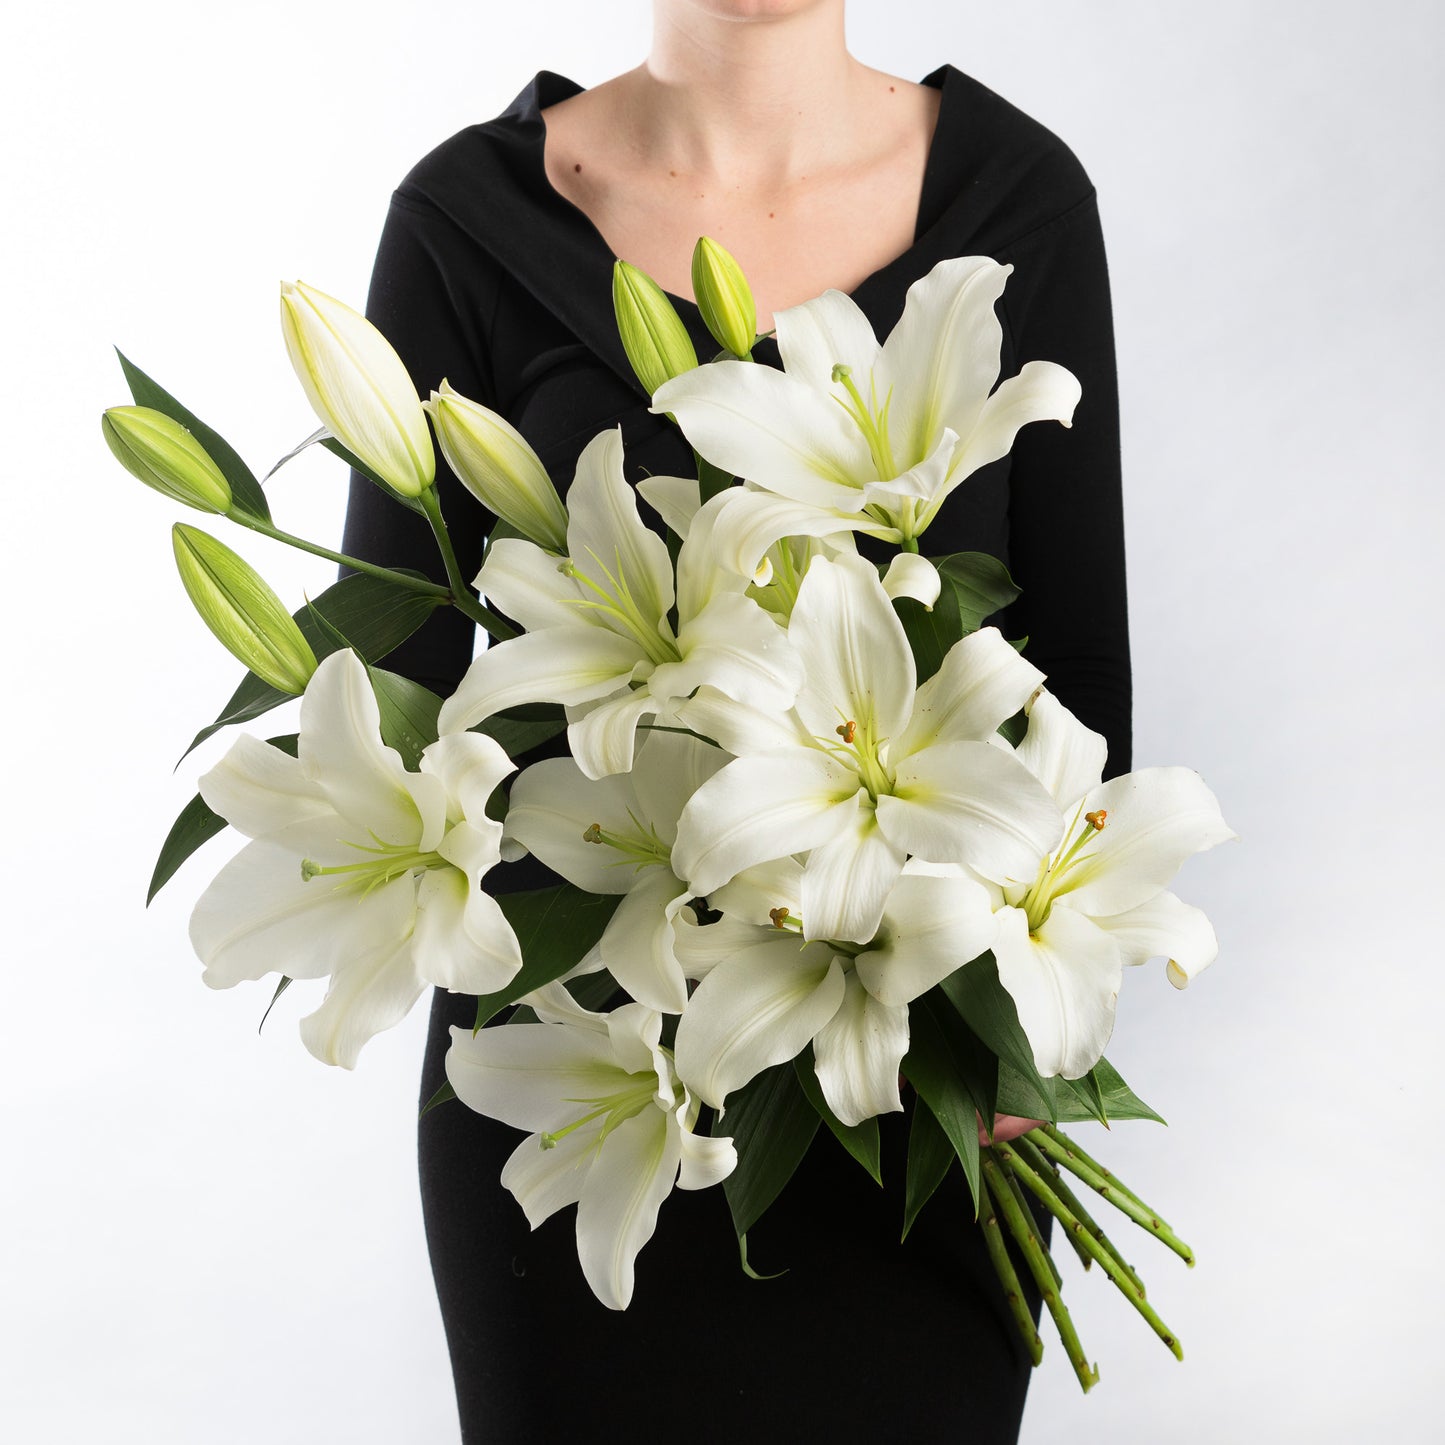 Woman wearing a black dress, holding a bouquet of white lilies